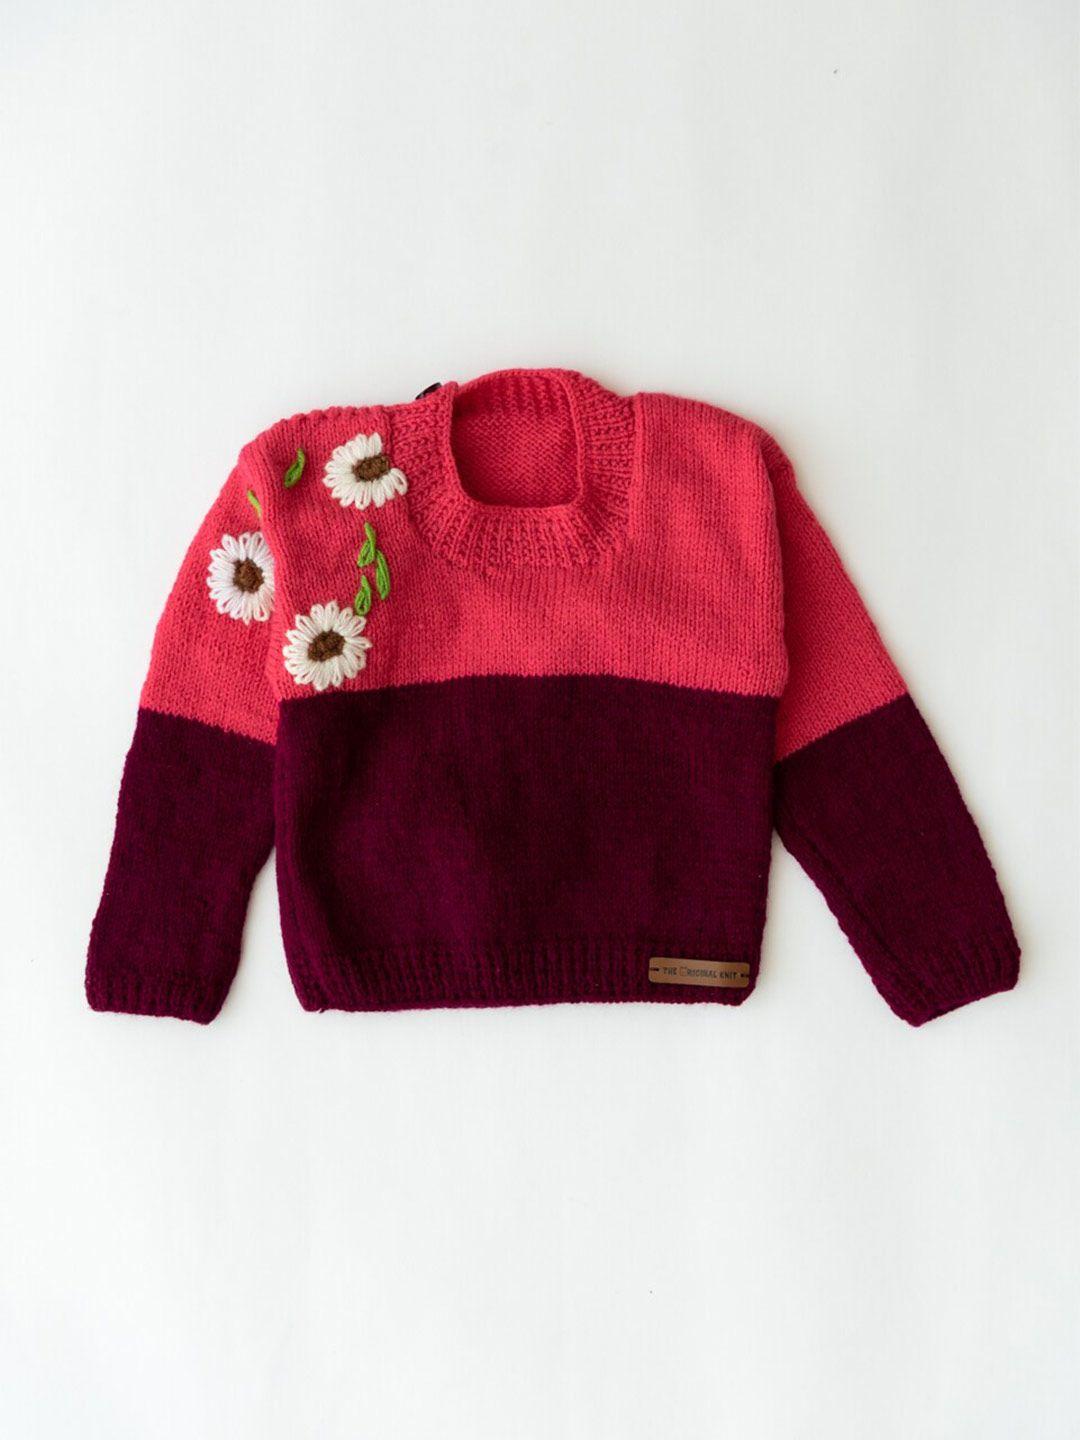 The Original Knit Kids Colourblocked Embroidered Sweater